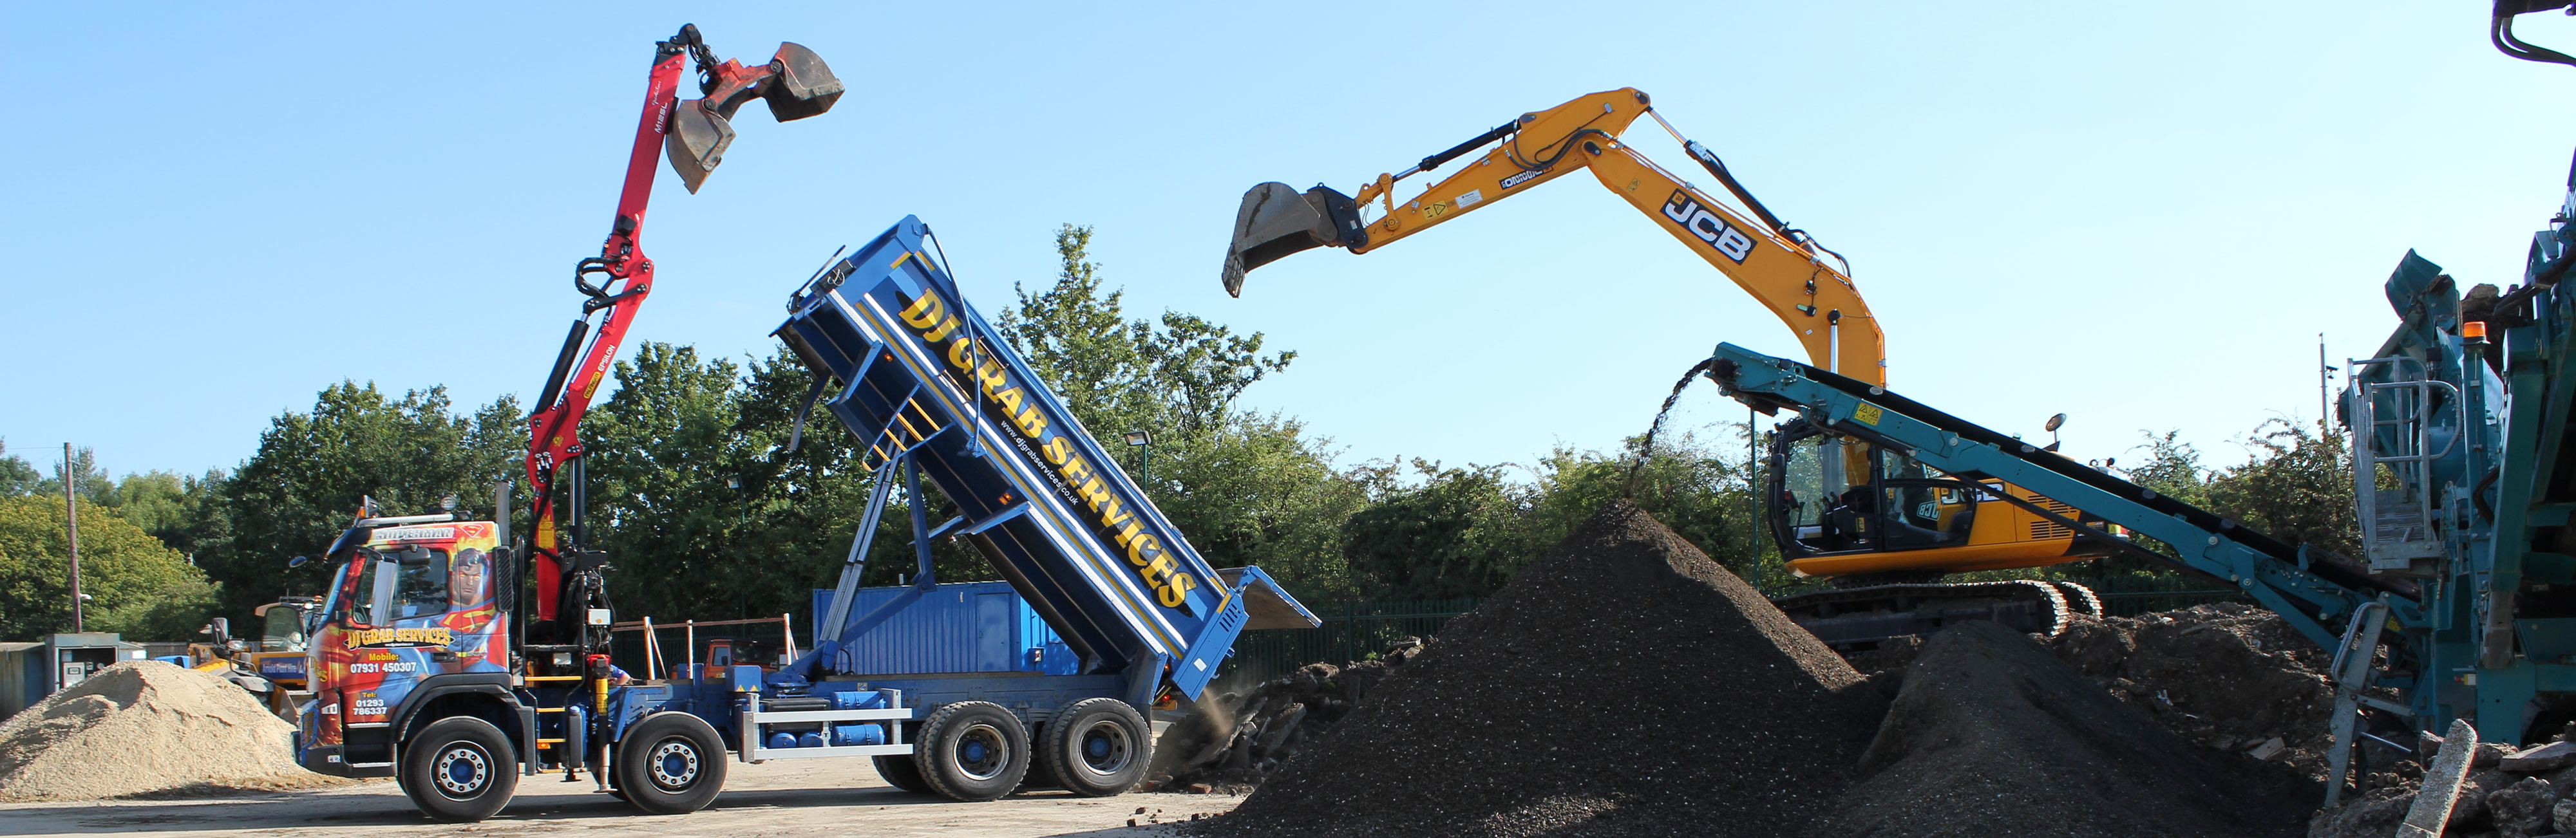 Muck away lorry hire for Surrey Sussex and London